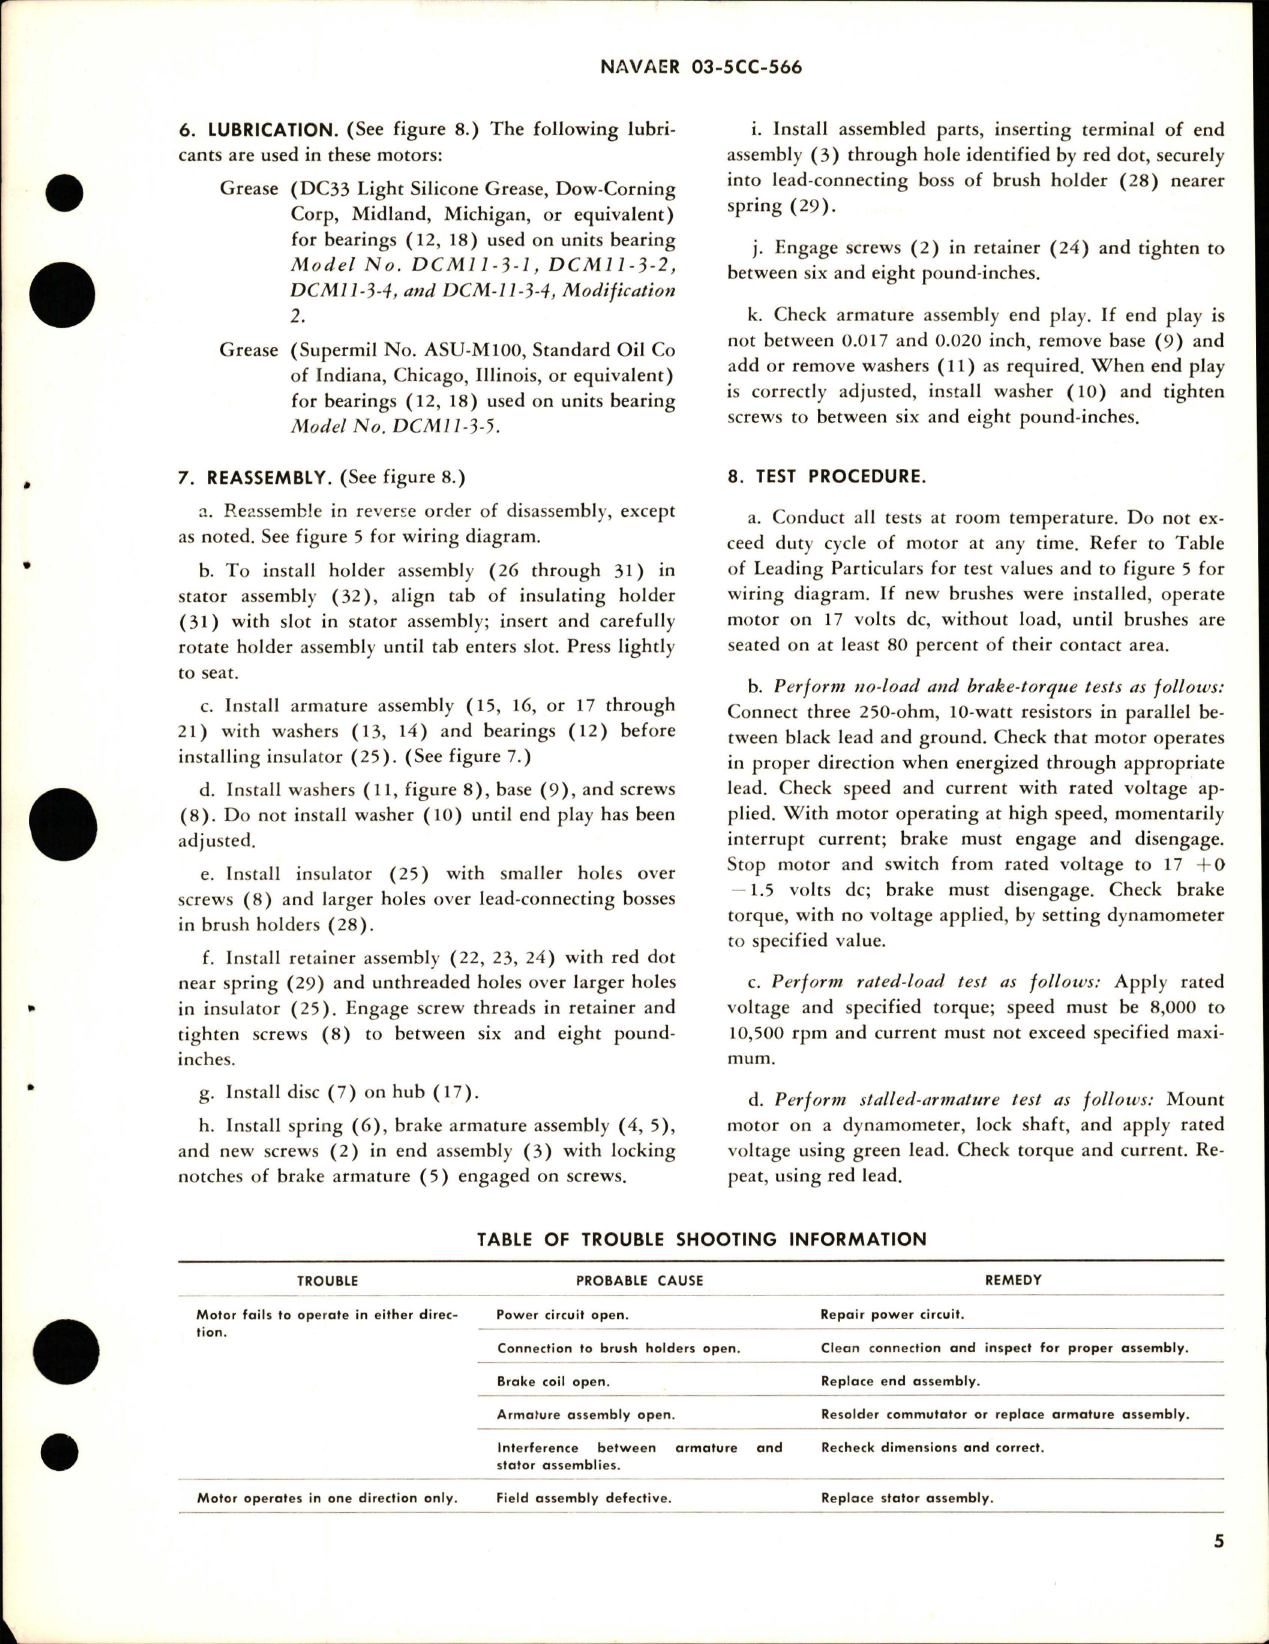 Sample page 5 from AirCorps Library document: Overhaul Instructions with Parts Breakdown for Direct-Current Motor - Part 36840